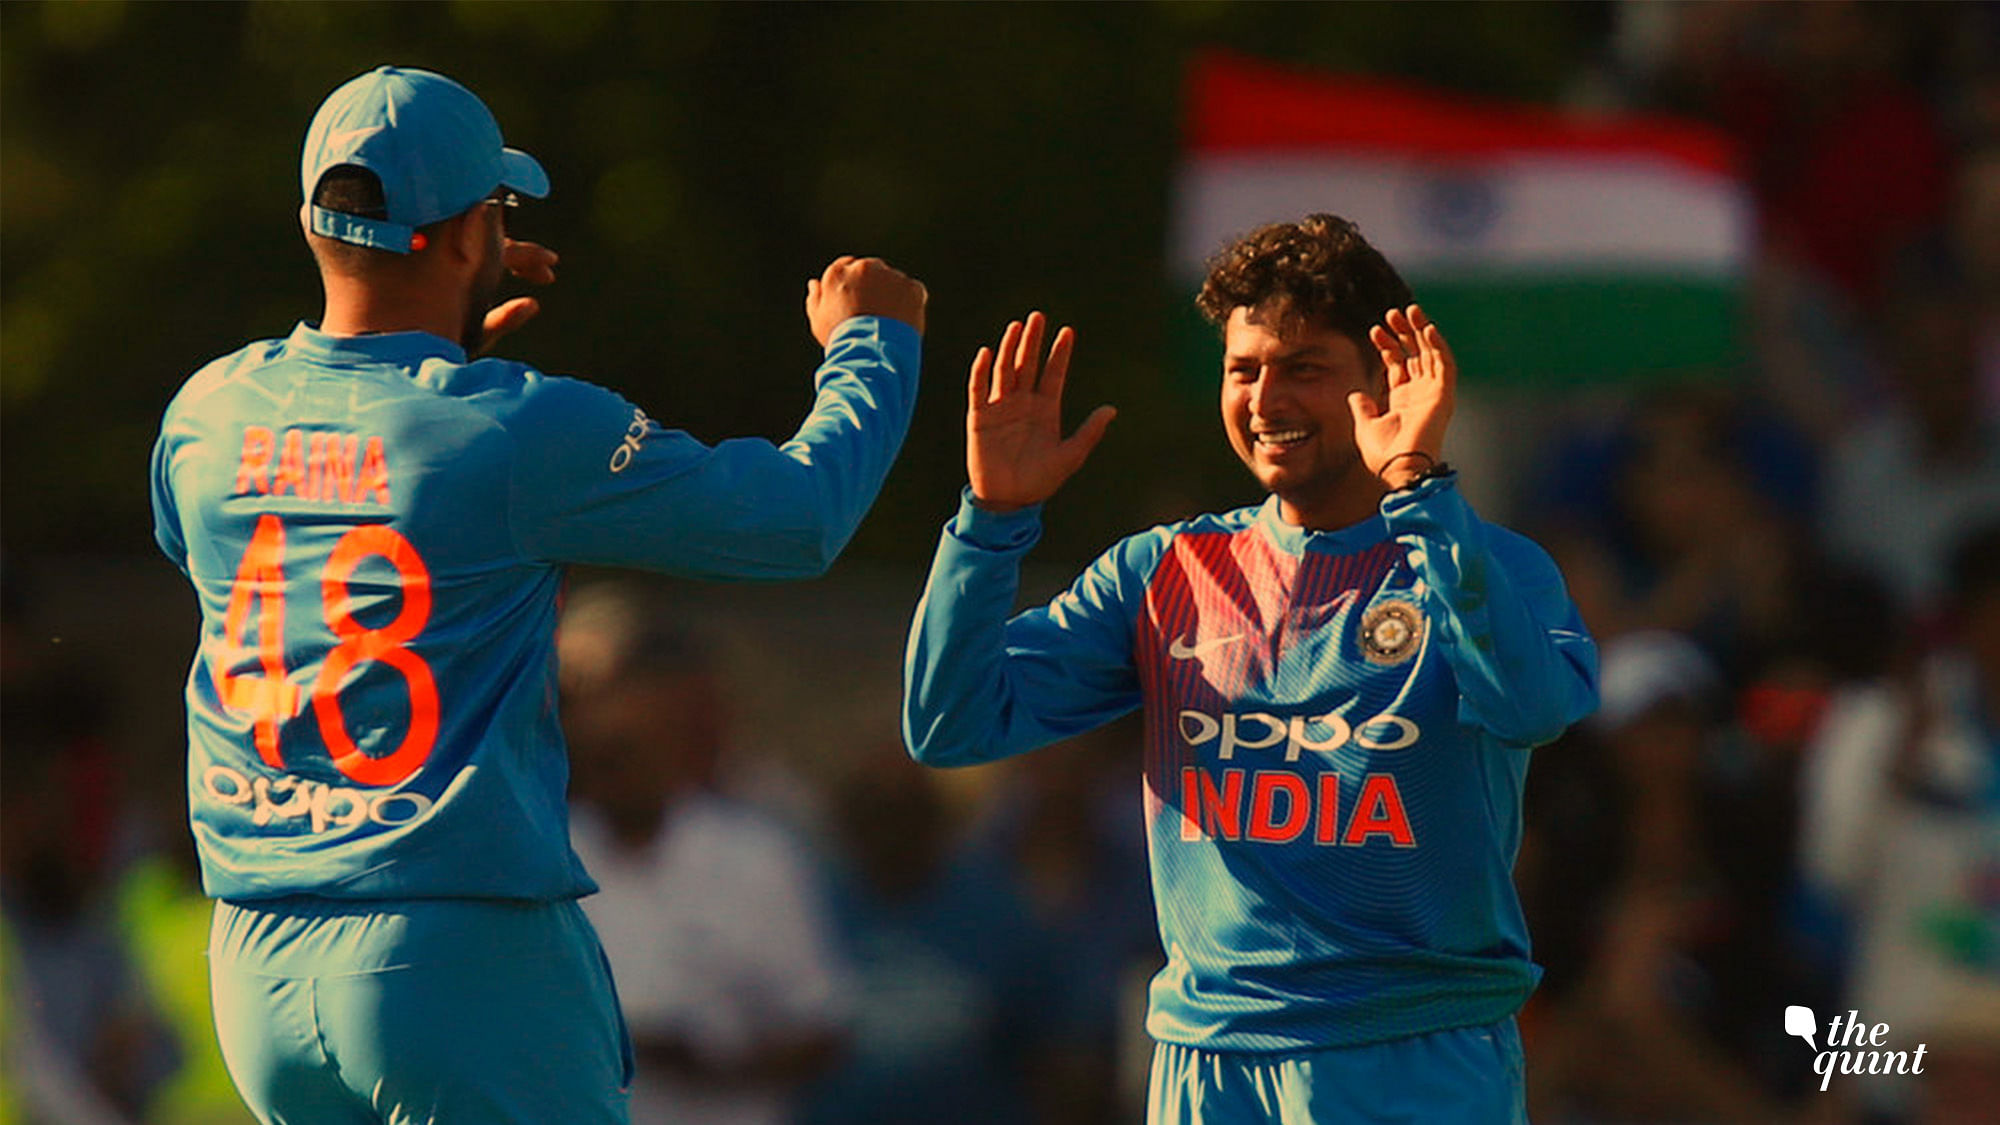 Kuldeep Yadav celebrates a wicket with Suresh Raina during the first T20I against England in Manchester on Tuesday.